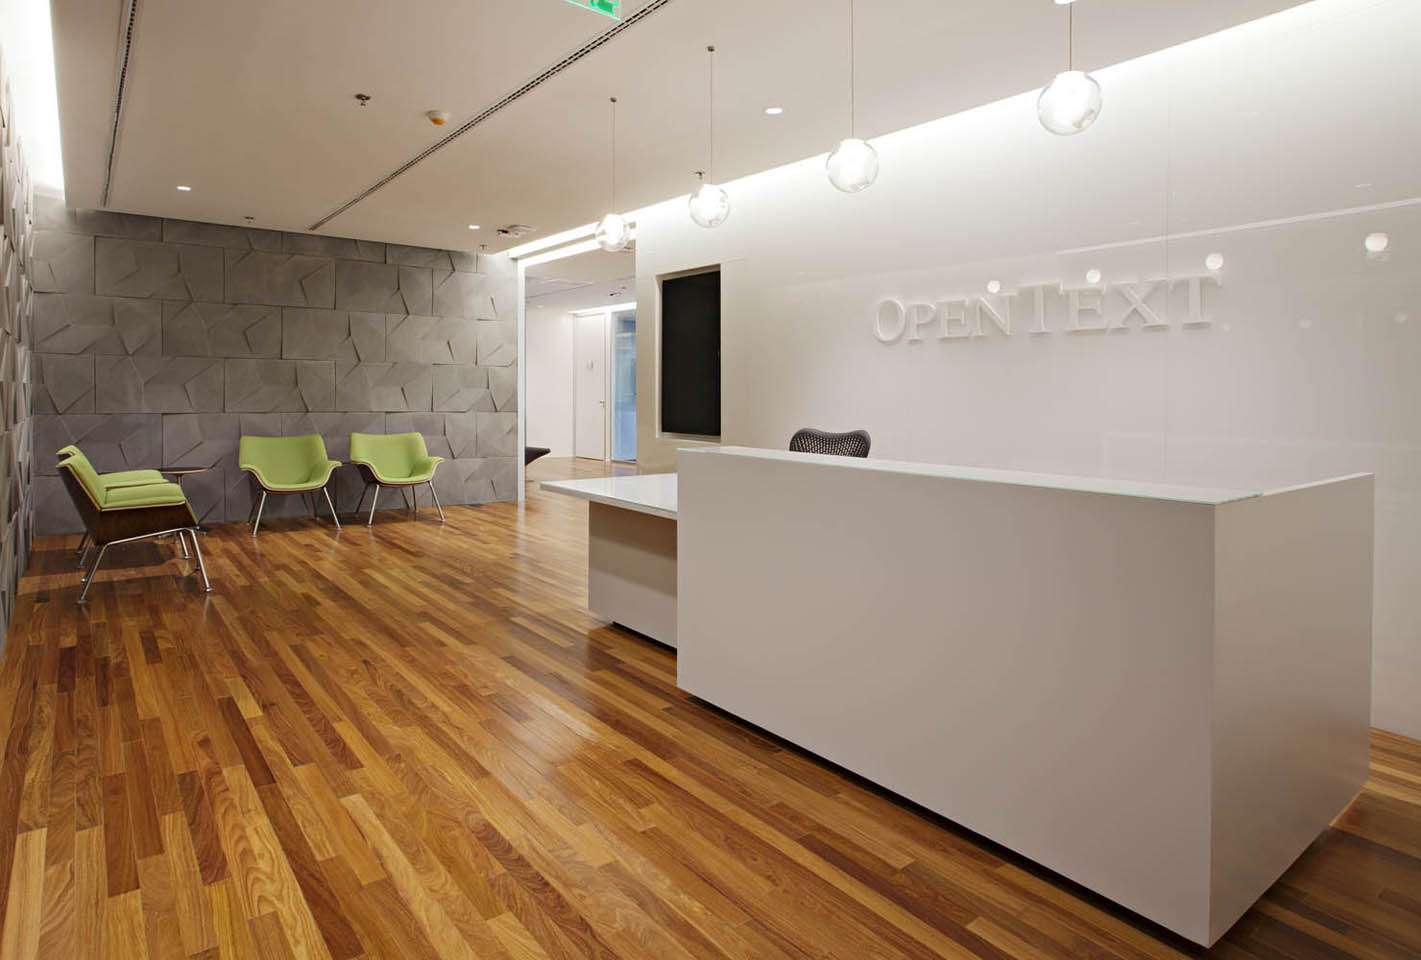 Open Text - Offices